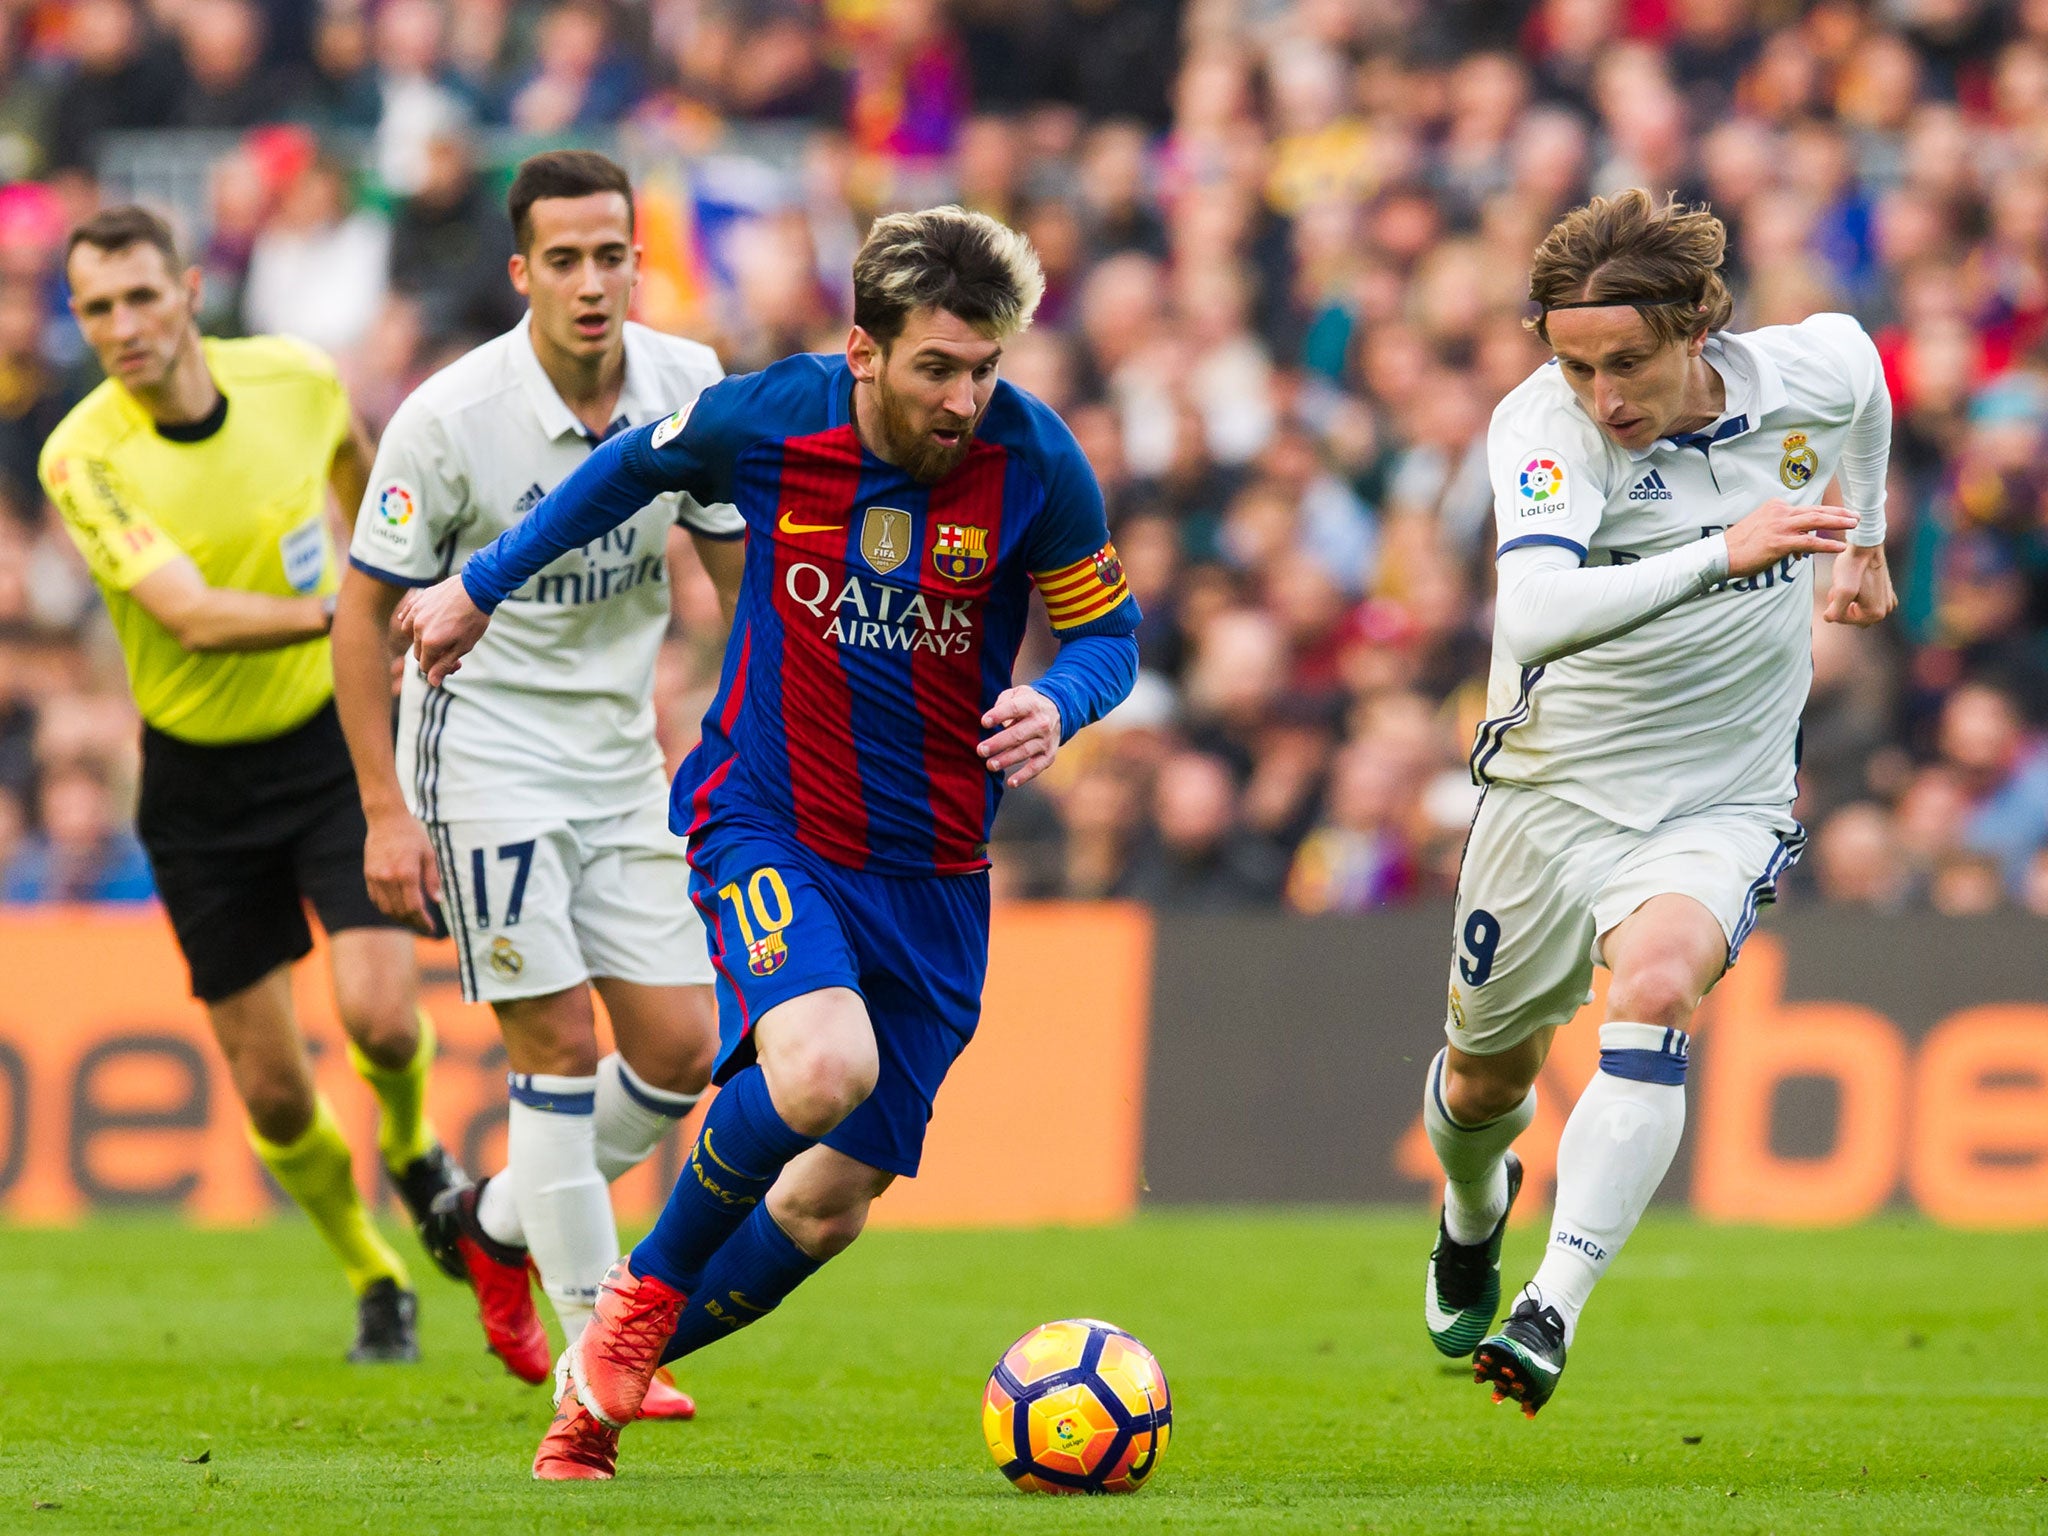 The last El Clasico, staged last December, culminated in a 1-1 draw